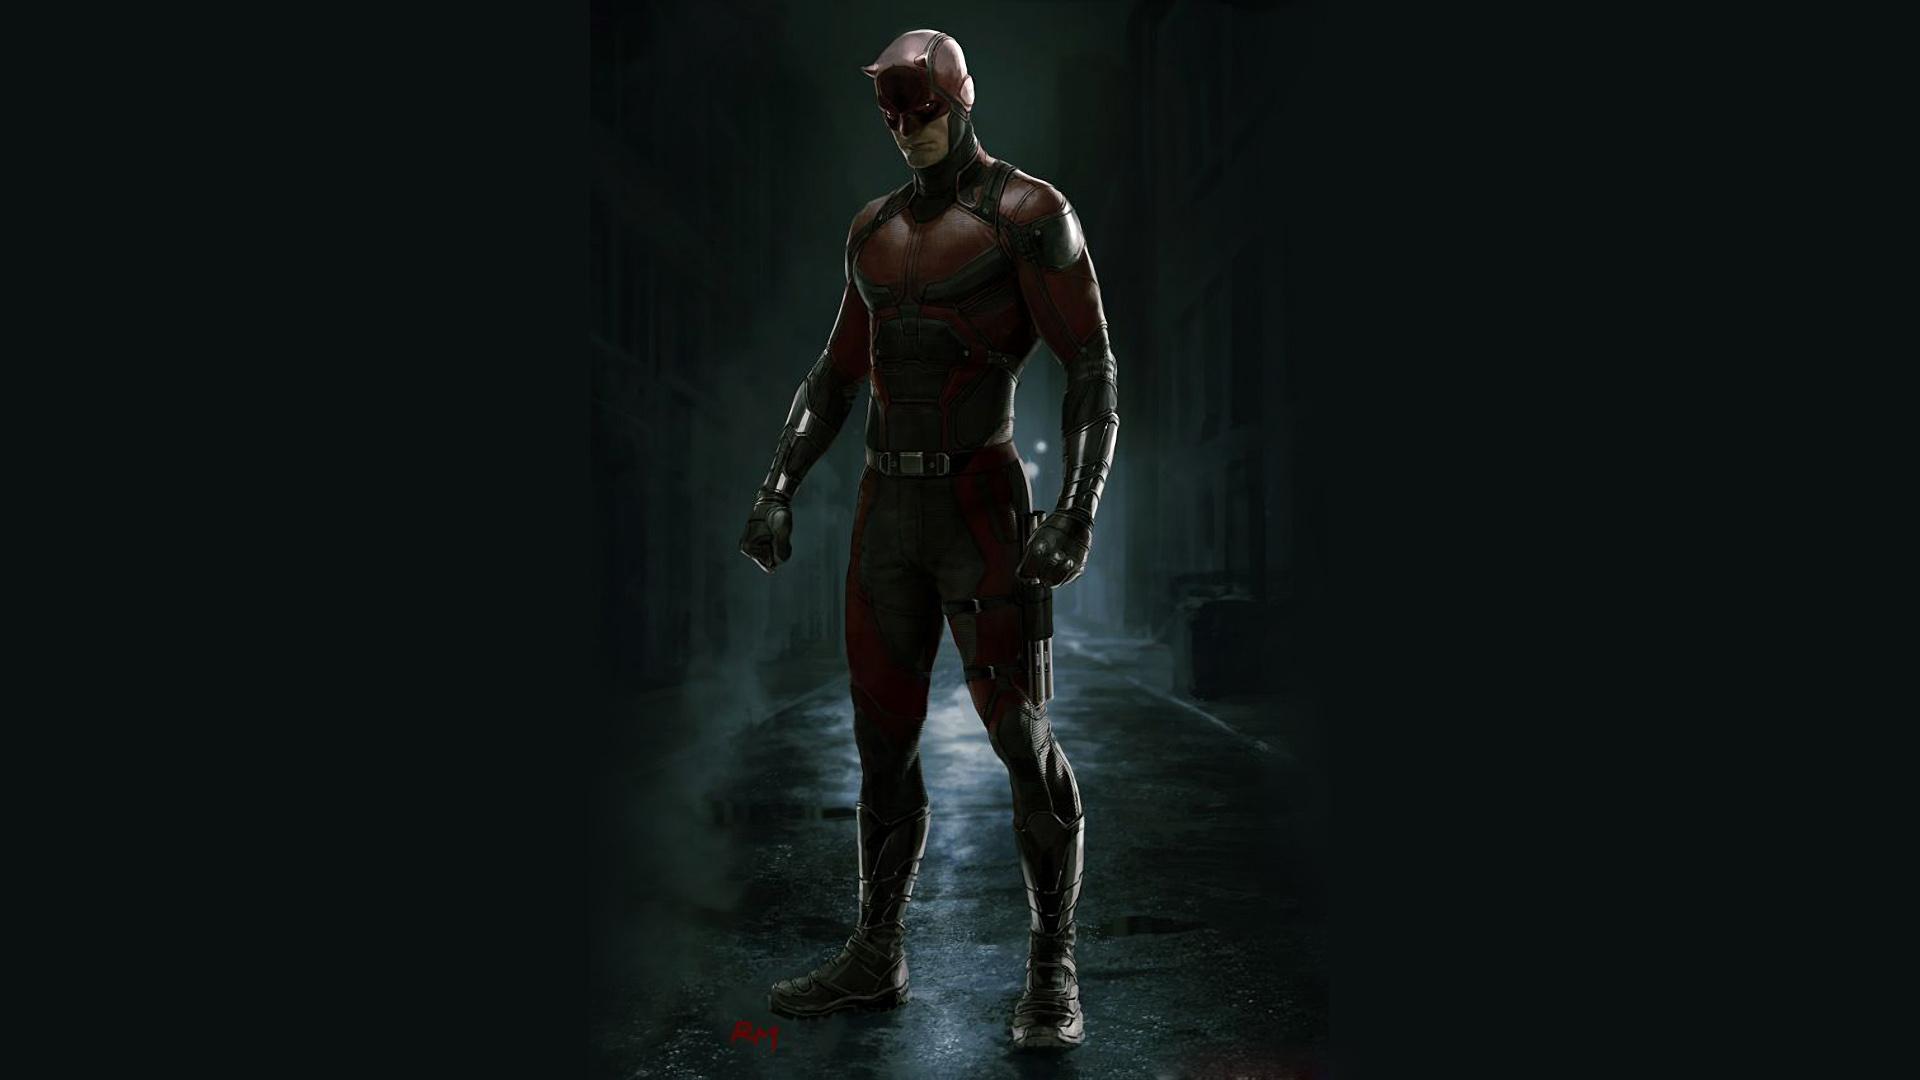 Cool Daredevil Wallpapers - Top Free Cool Daredevil Backgrounds ...